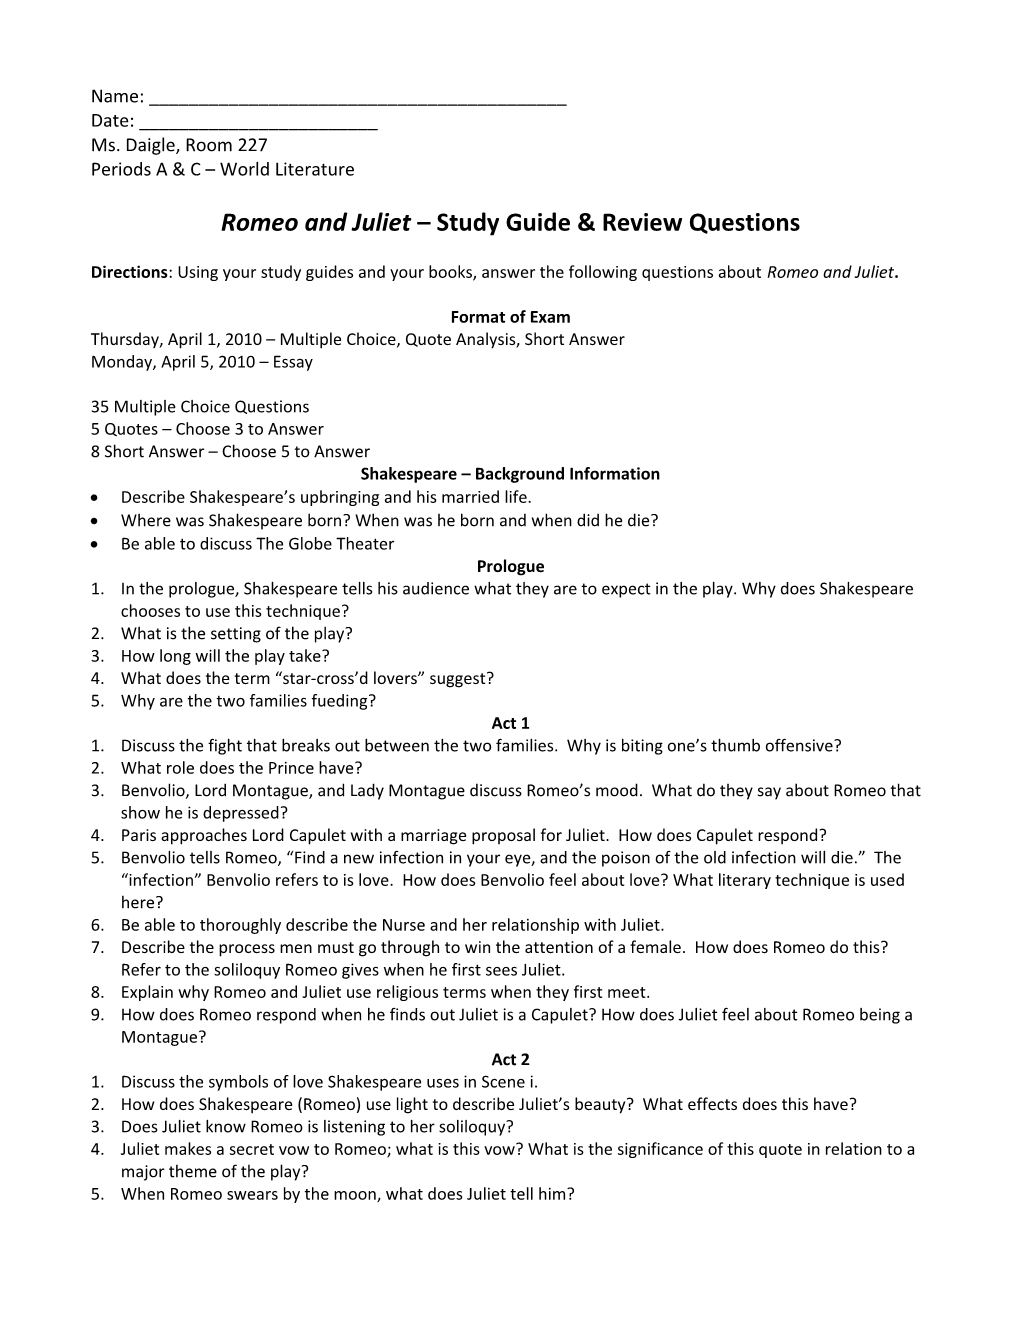 Romeo and Juliet Study Guide & Review Questions